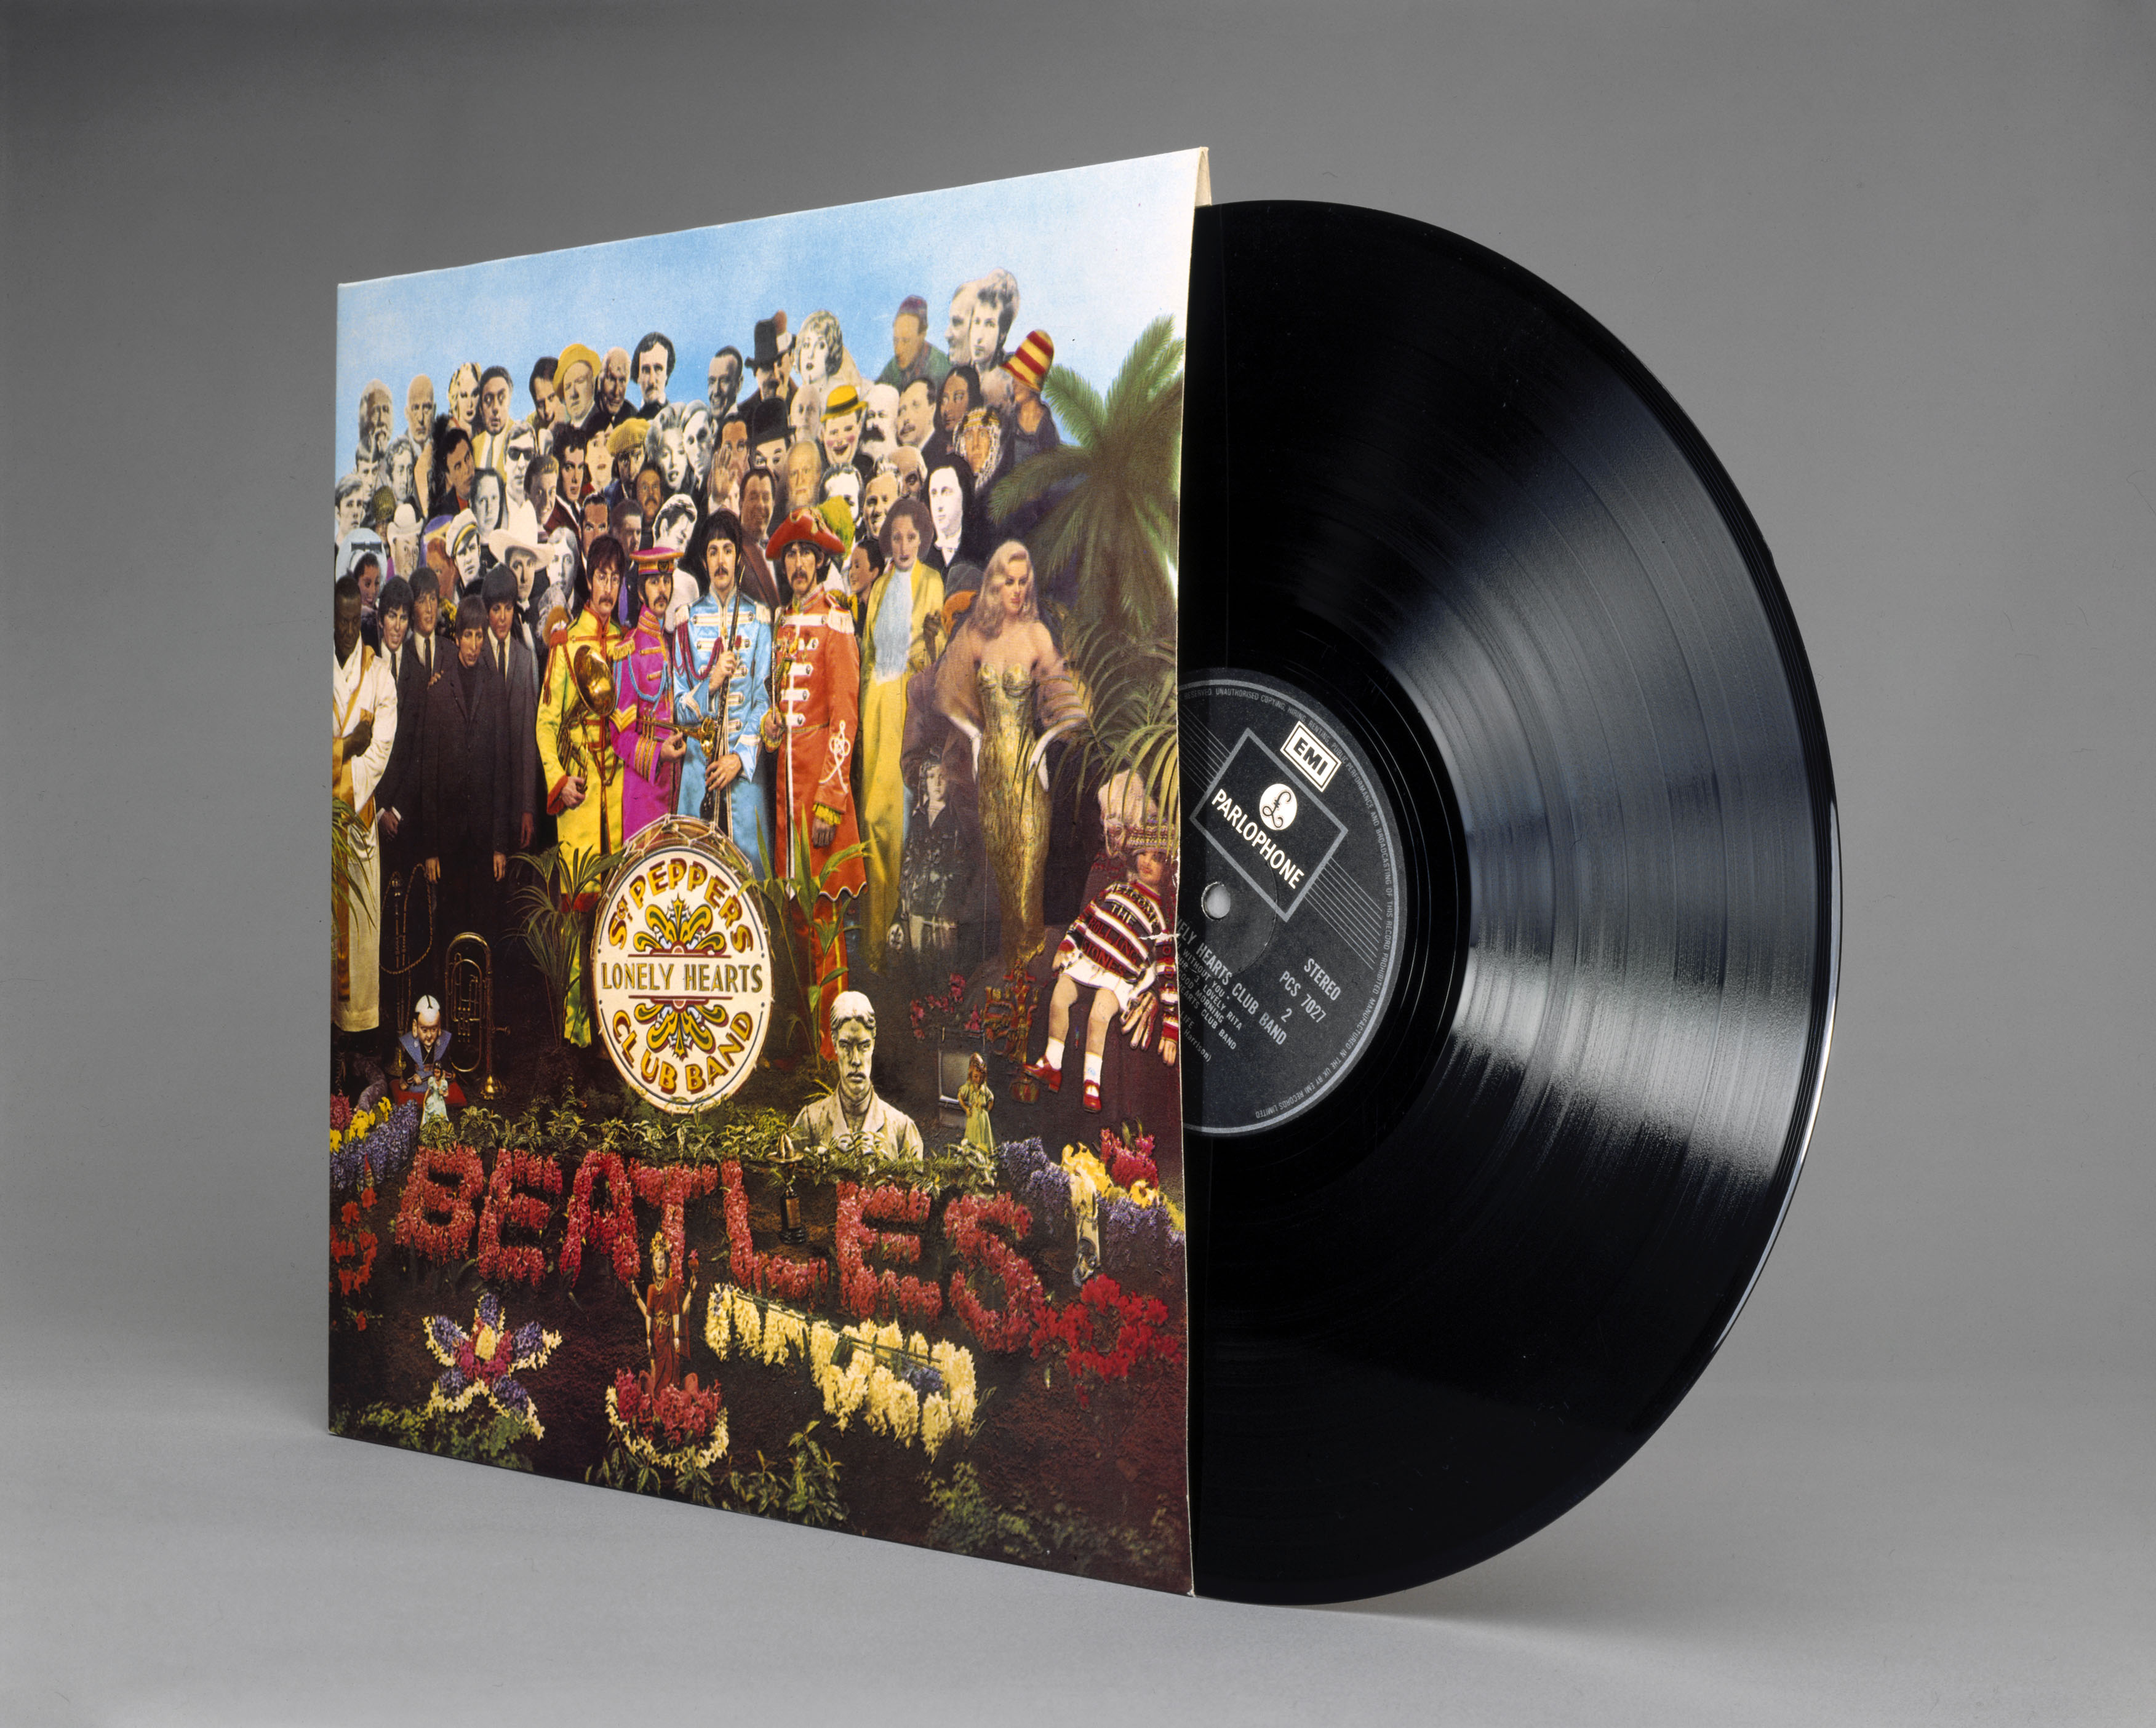 A vinyl copy of The Beatles’ ‘Sgt. Pepper’s Lonely Hearts Club Band’